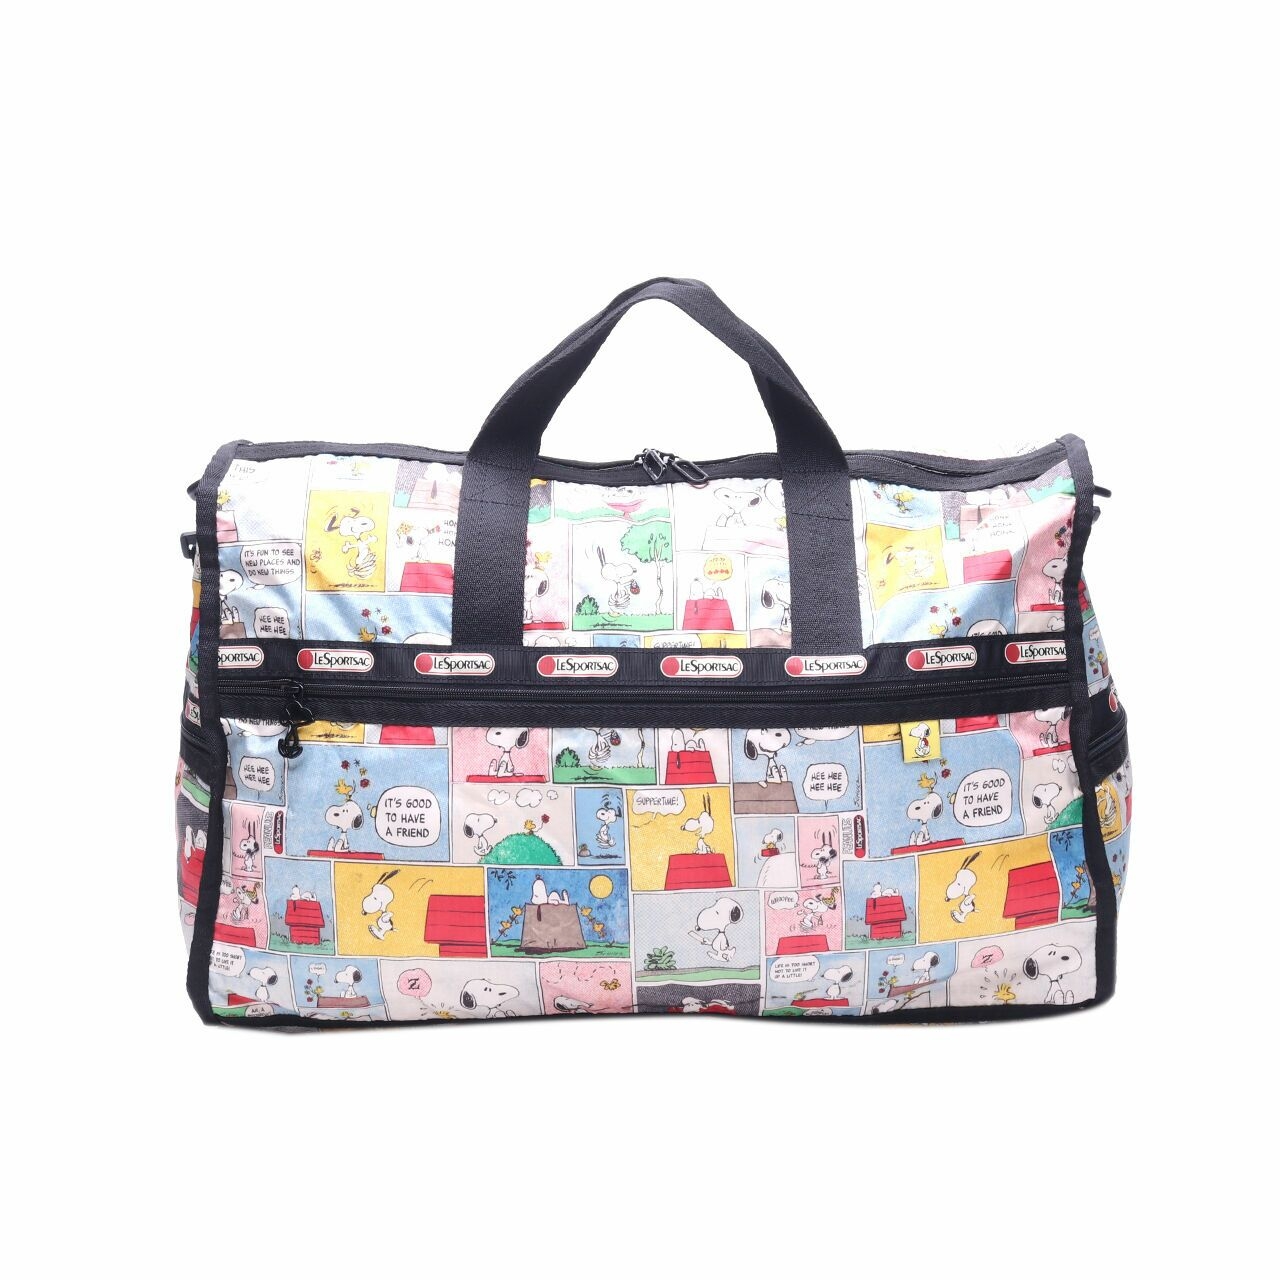 Le Sportsac Multicolor Printed Luggage and Travel